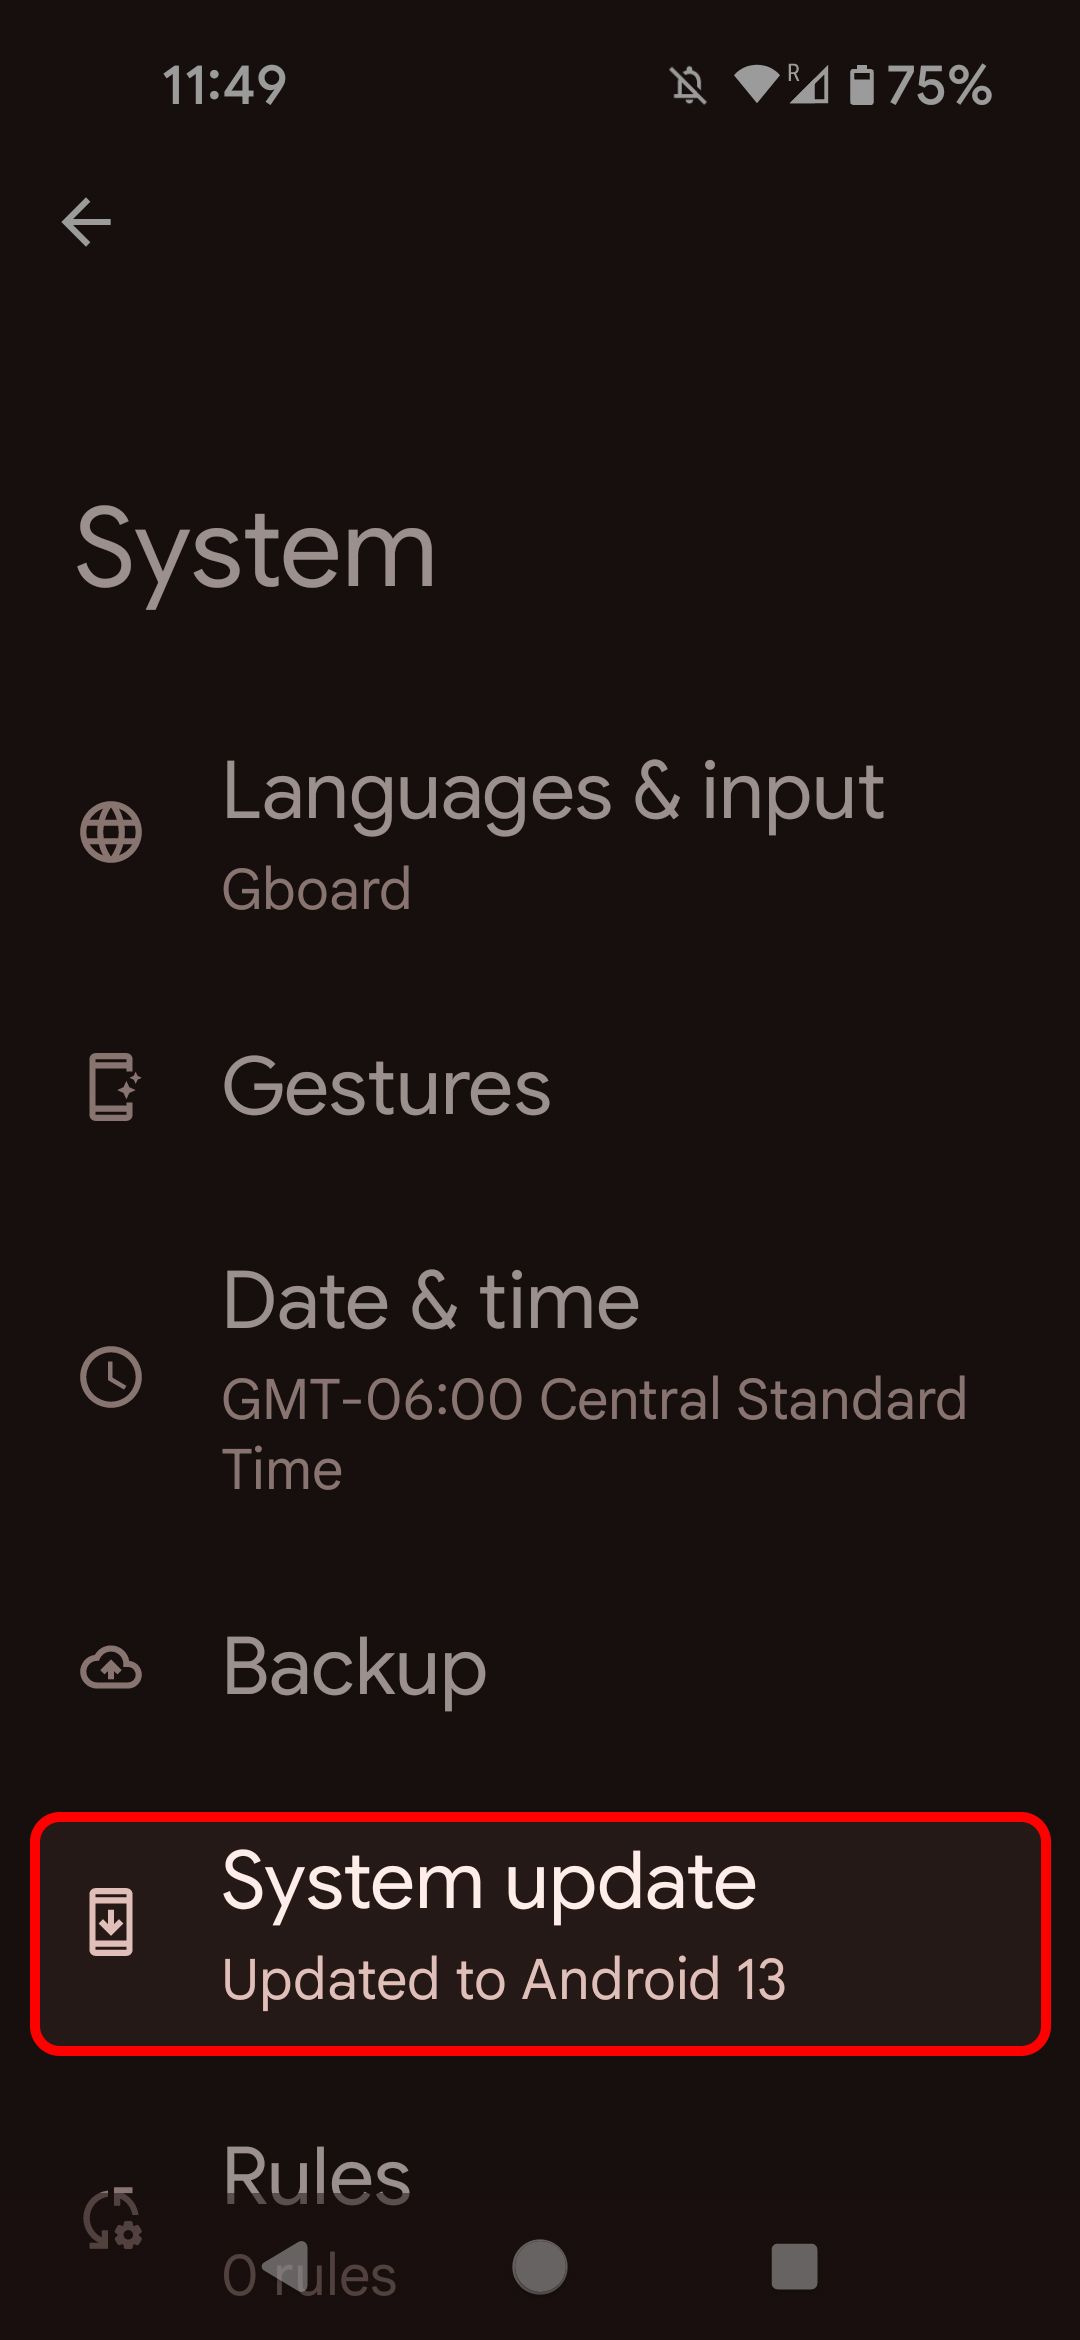 Android system menu highlighting the system update option